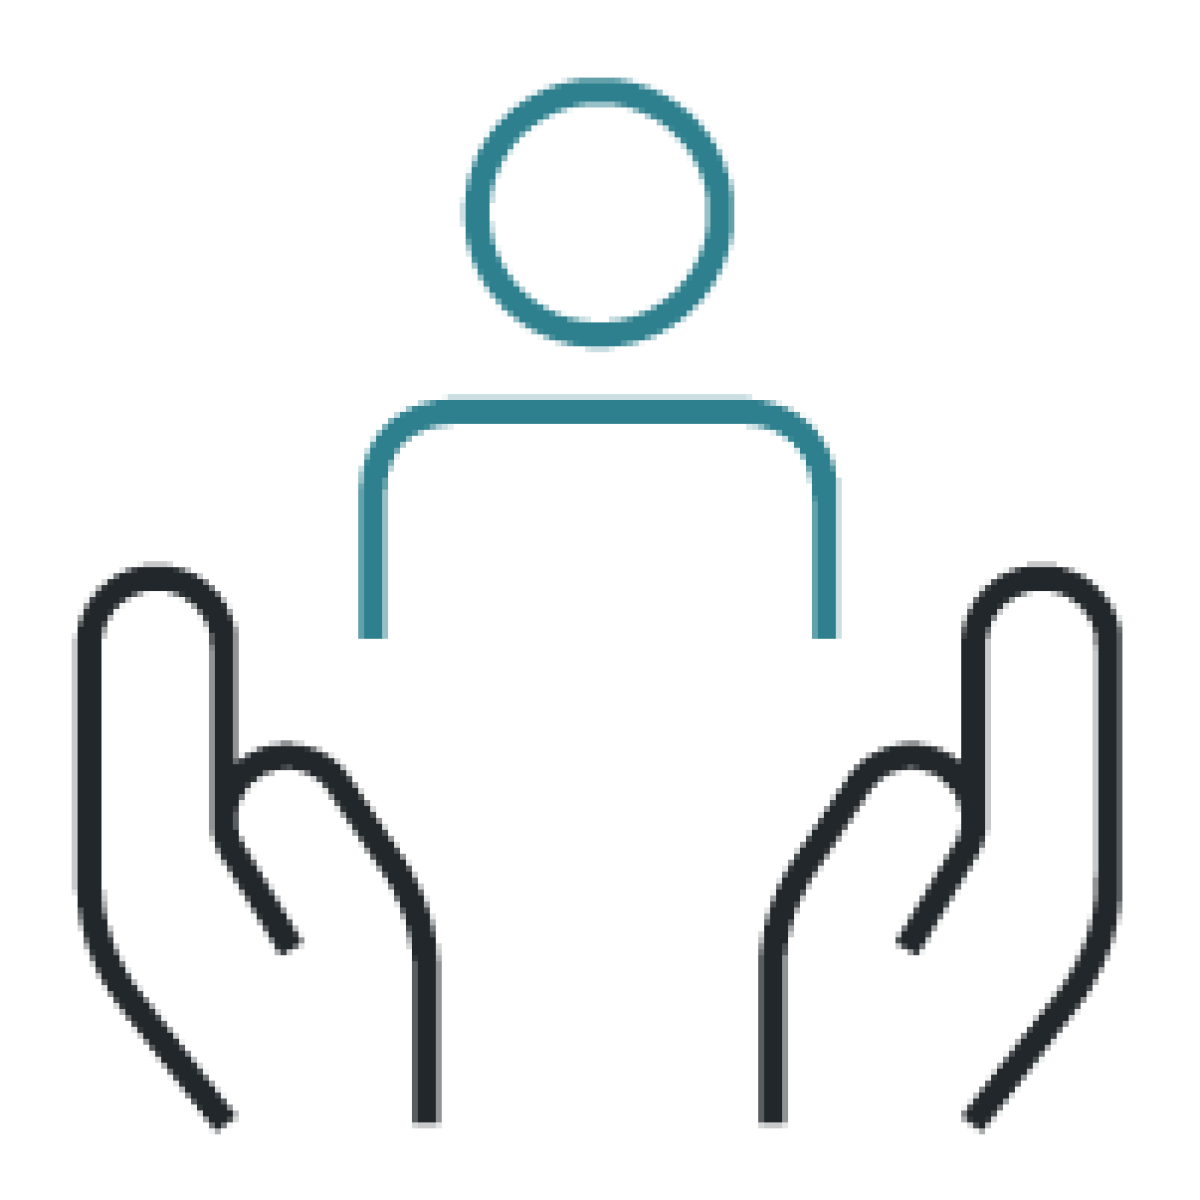 Icon with pair of hands holding up teal person.